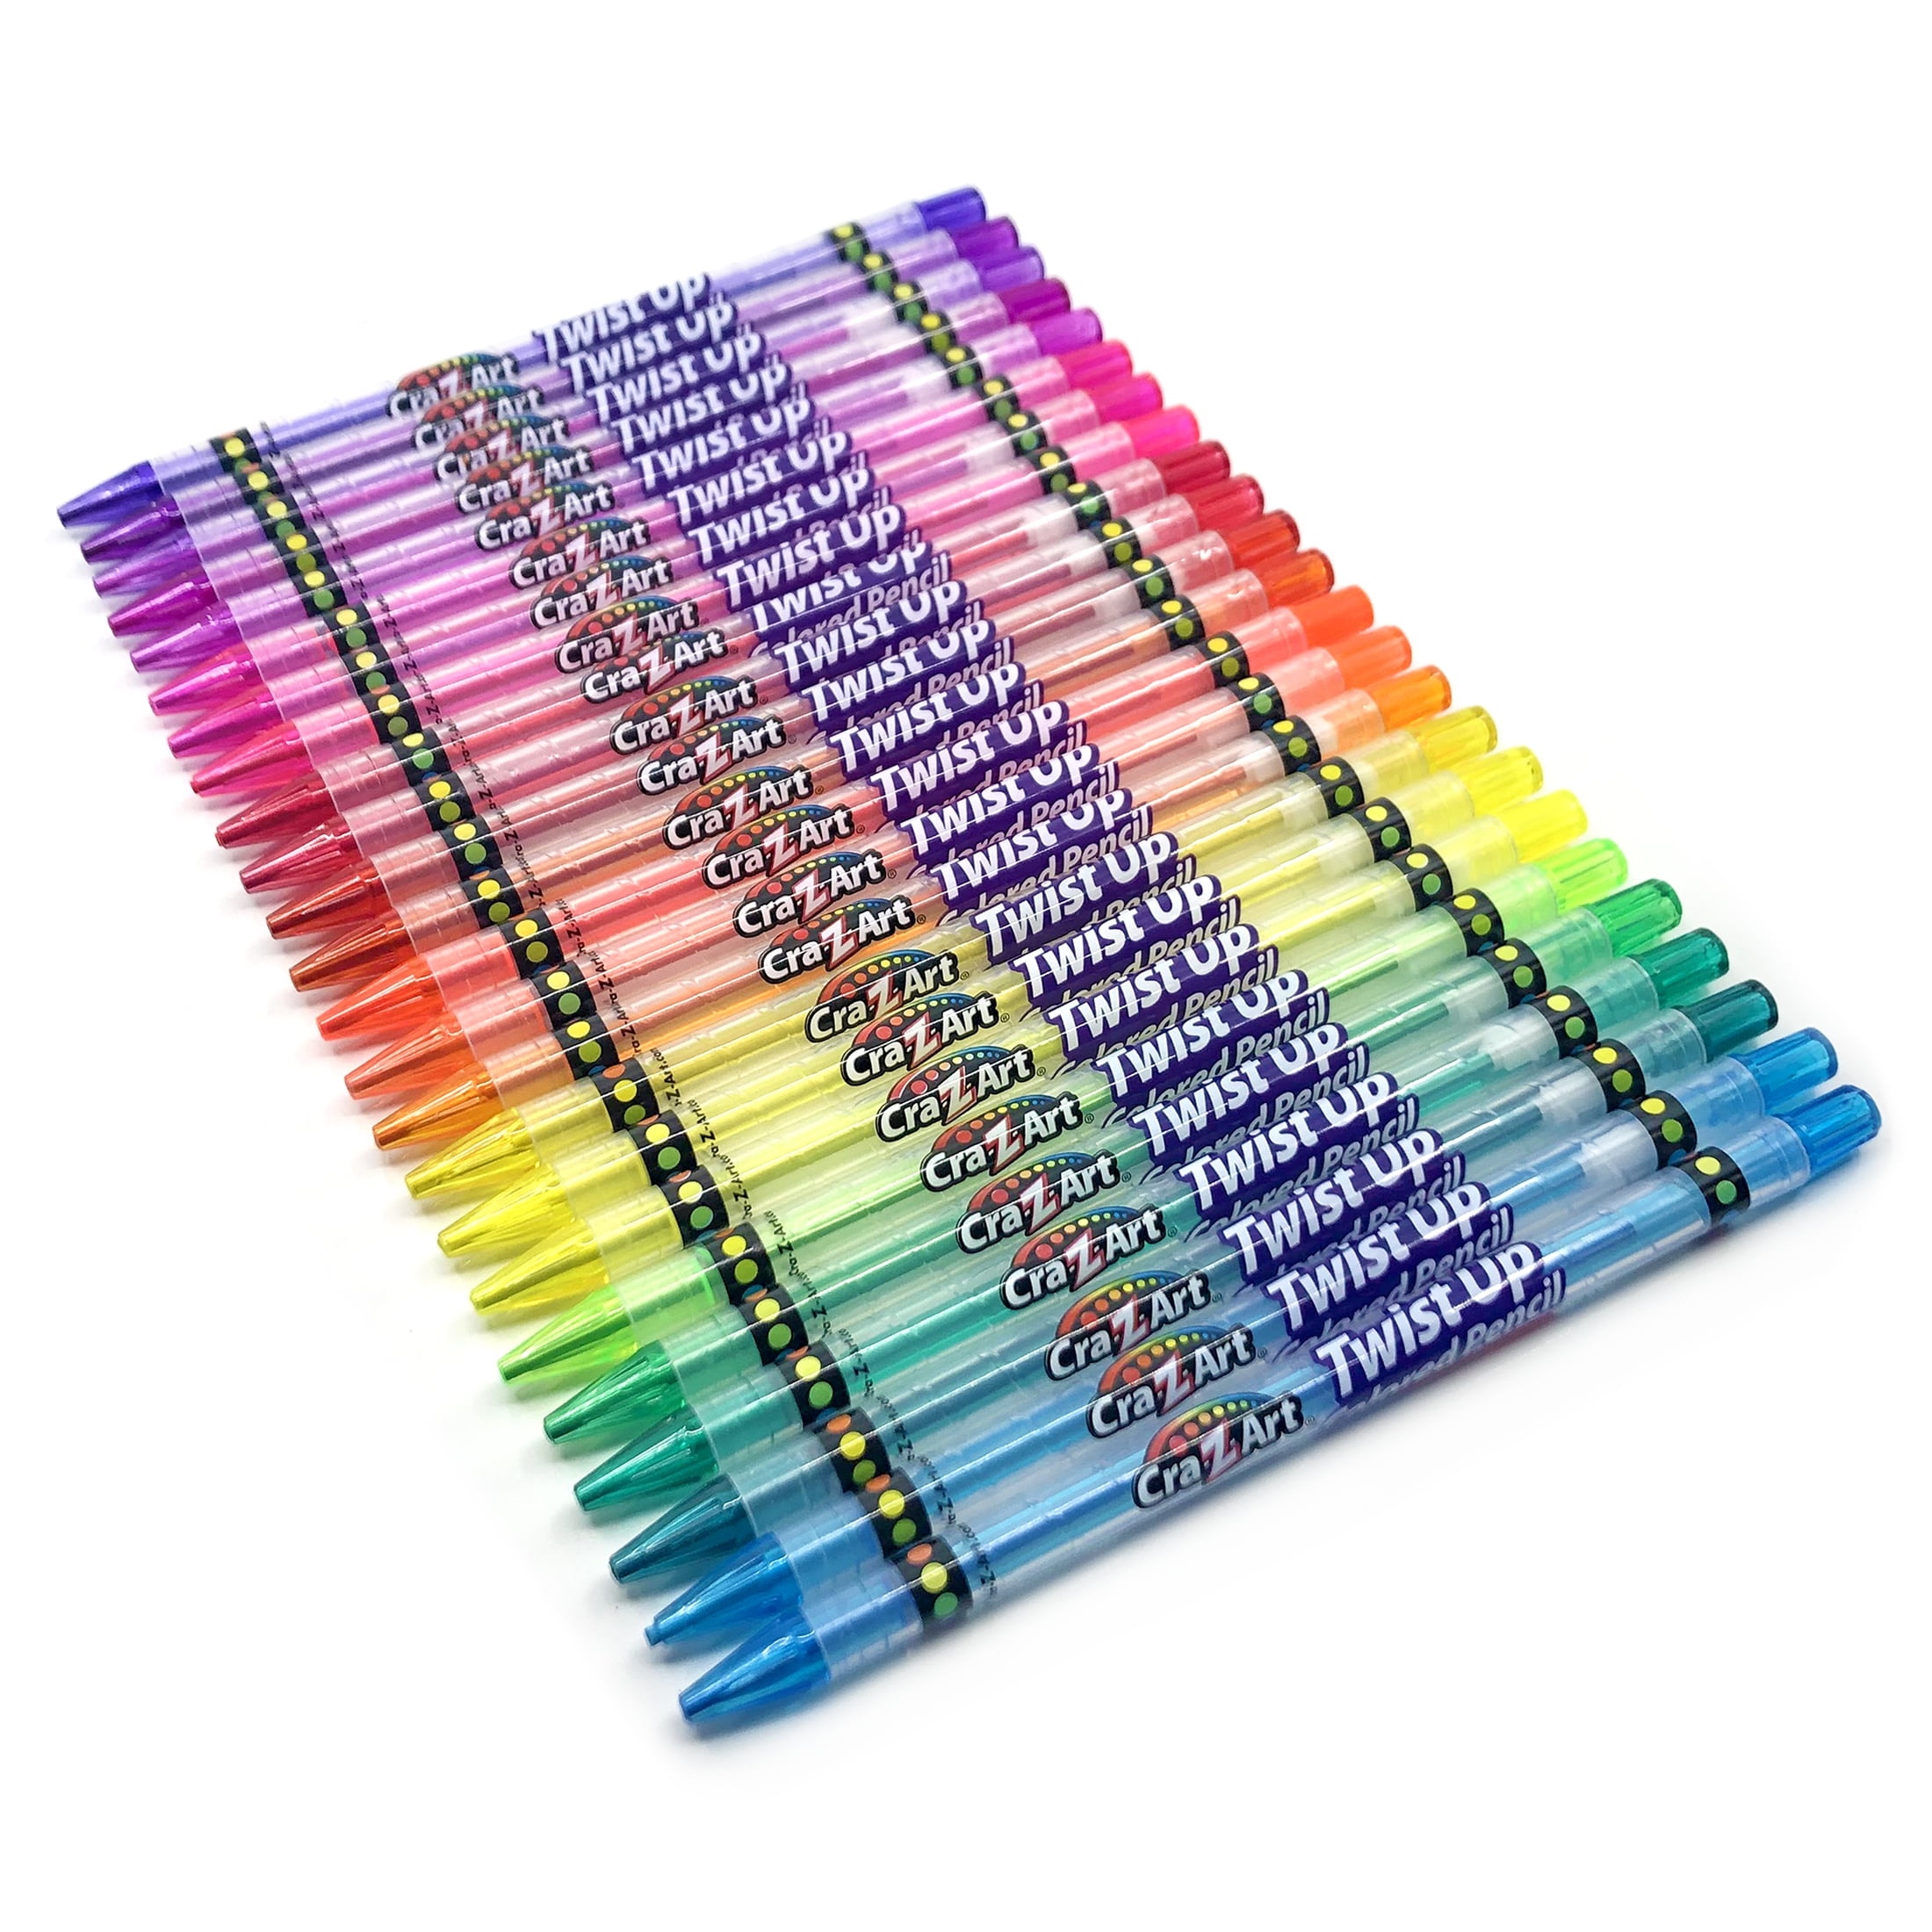 Cra-Z-Art Neon Twist up Colored Pencils, 24 Count Multicolor, Beginner,  Child to Adult 